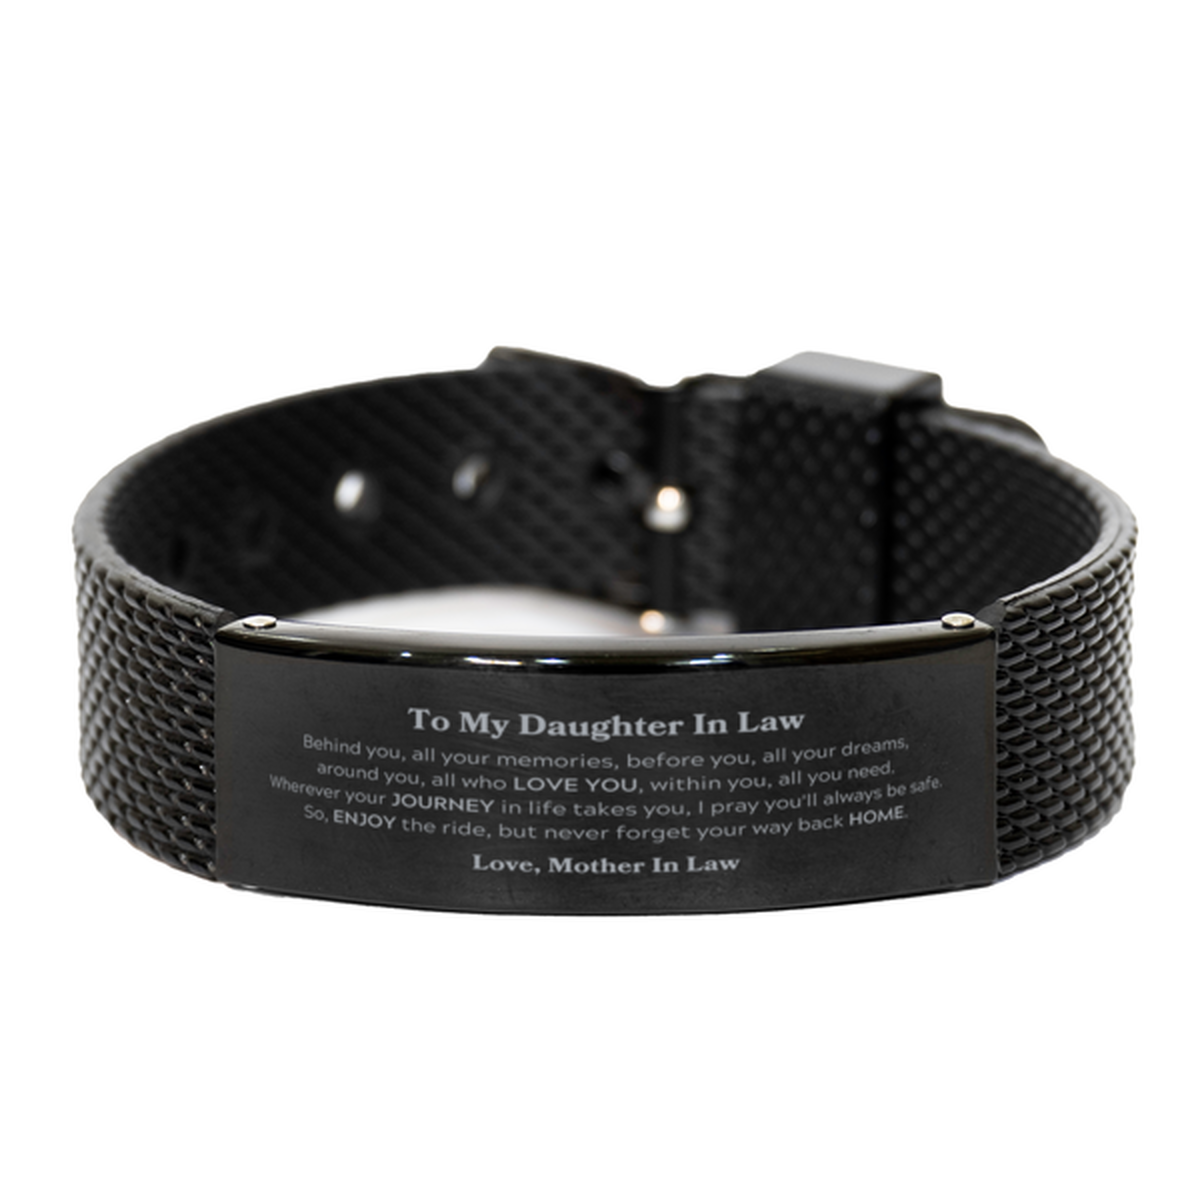 To My Daughter In Law Graduation Gifts from Mother In Law, Daughter In Law Black Shark Mesh Bracelet Christmas Birthday Gifts for Daughter In Law Behind you, all your memories, before you, all your dreams. Love, Mother In Law